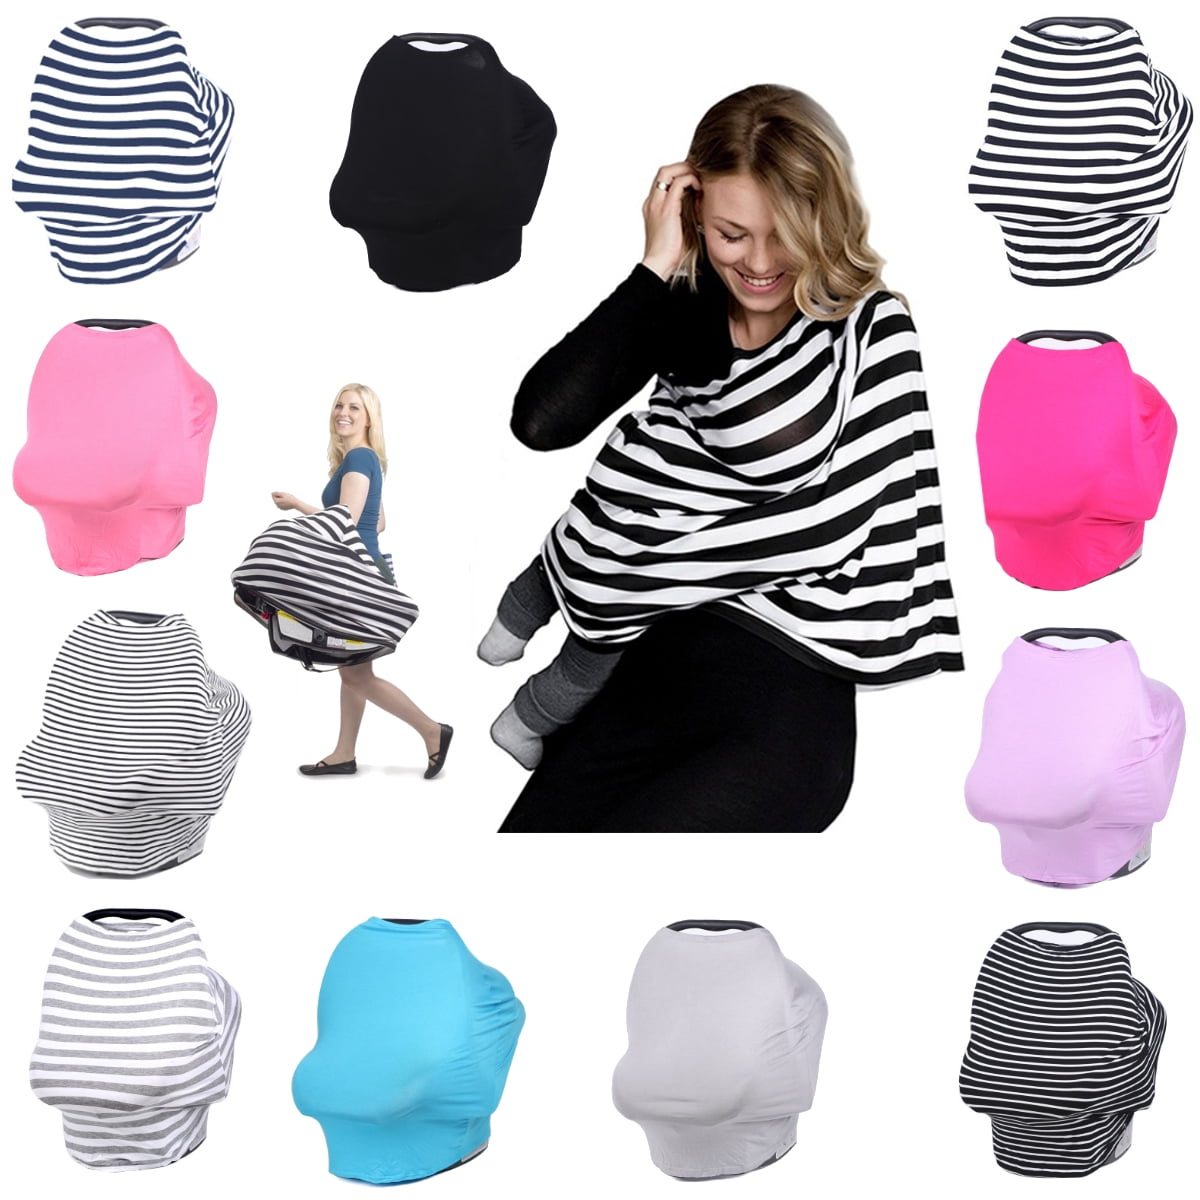 Multi-Use Nursing Cover and Infinity Scarf Palmera Baby Car Seat & Shopping Cart Cover Stretchy Cart and Highchair Covering Cotton Breastfeeding Covers & Scarves Car Seat Cover & Canopy 